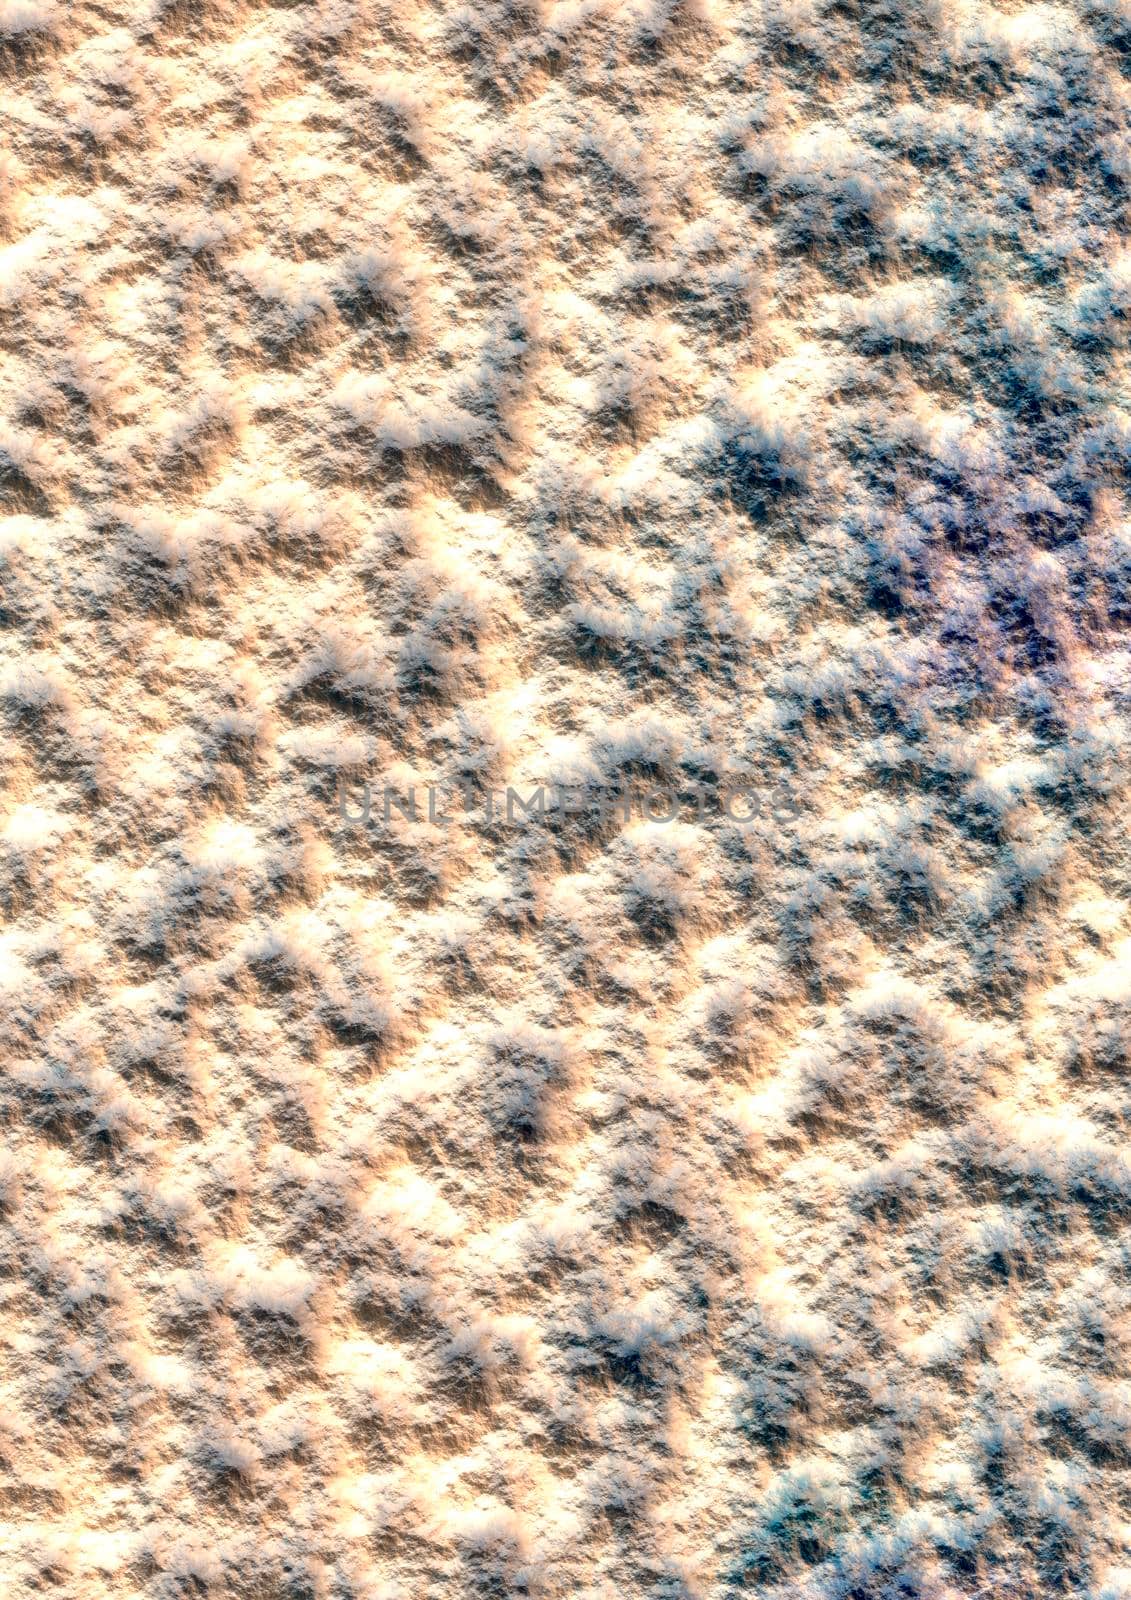 Stone surface close up as a background